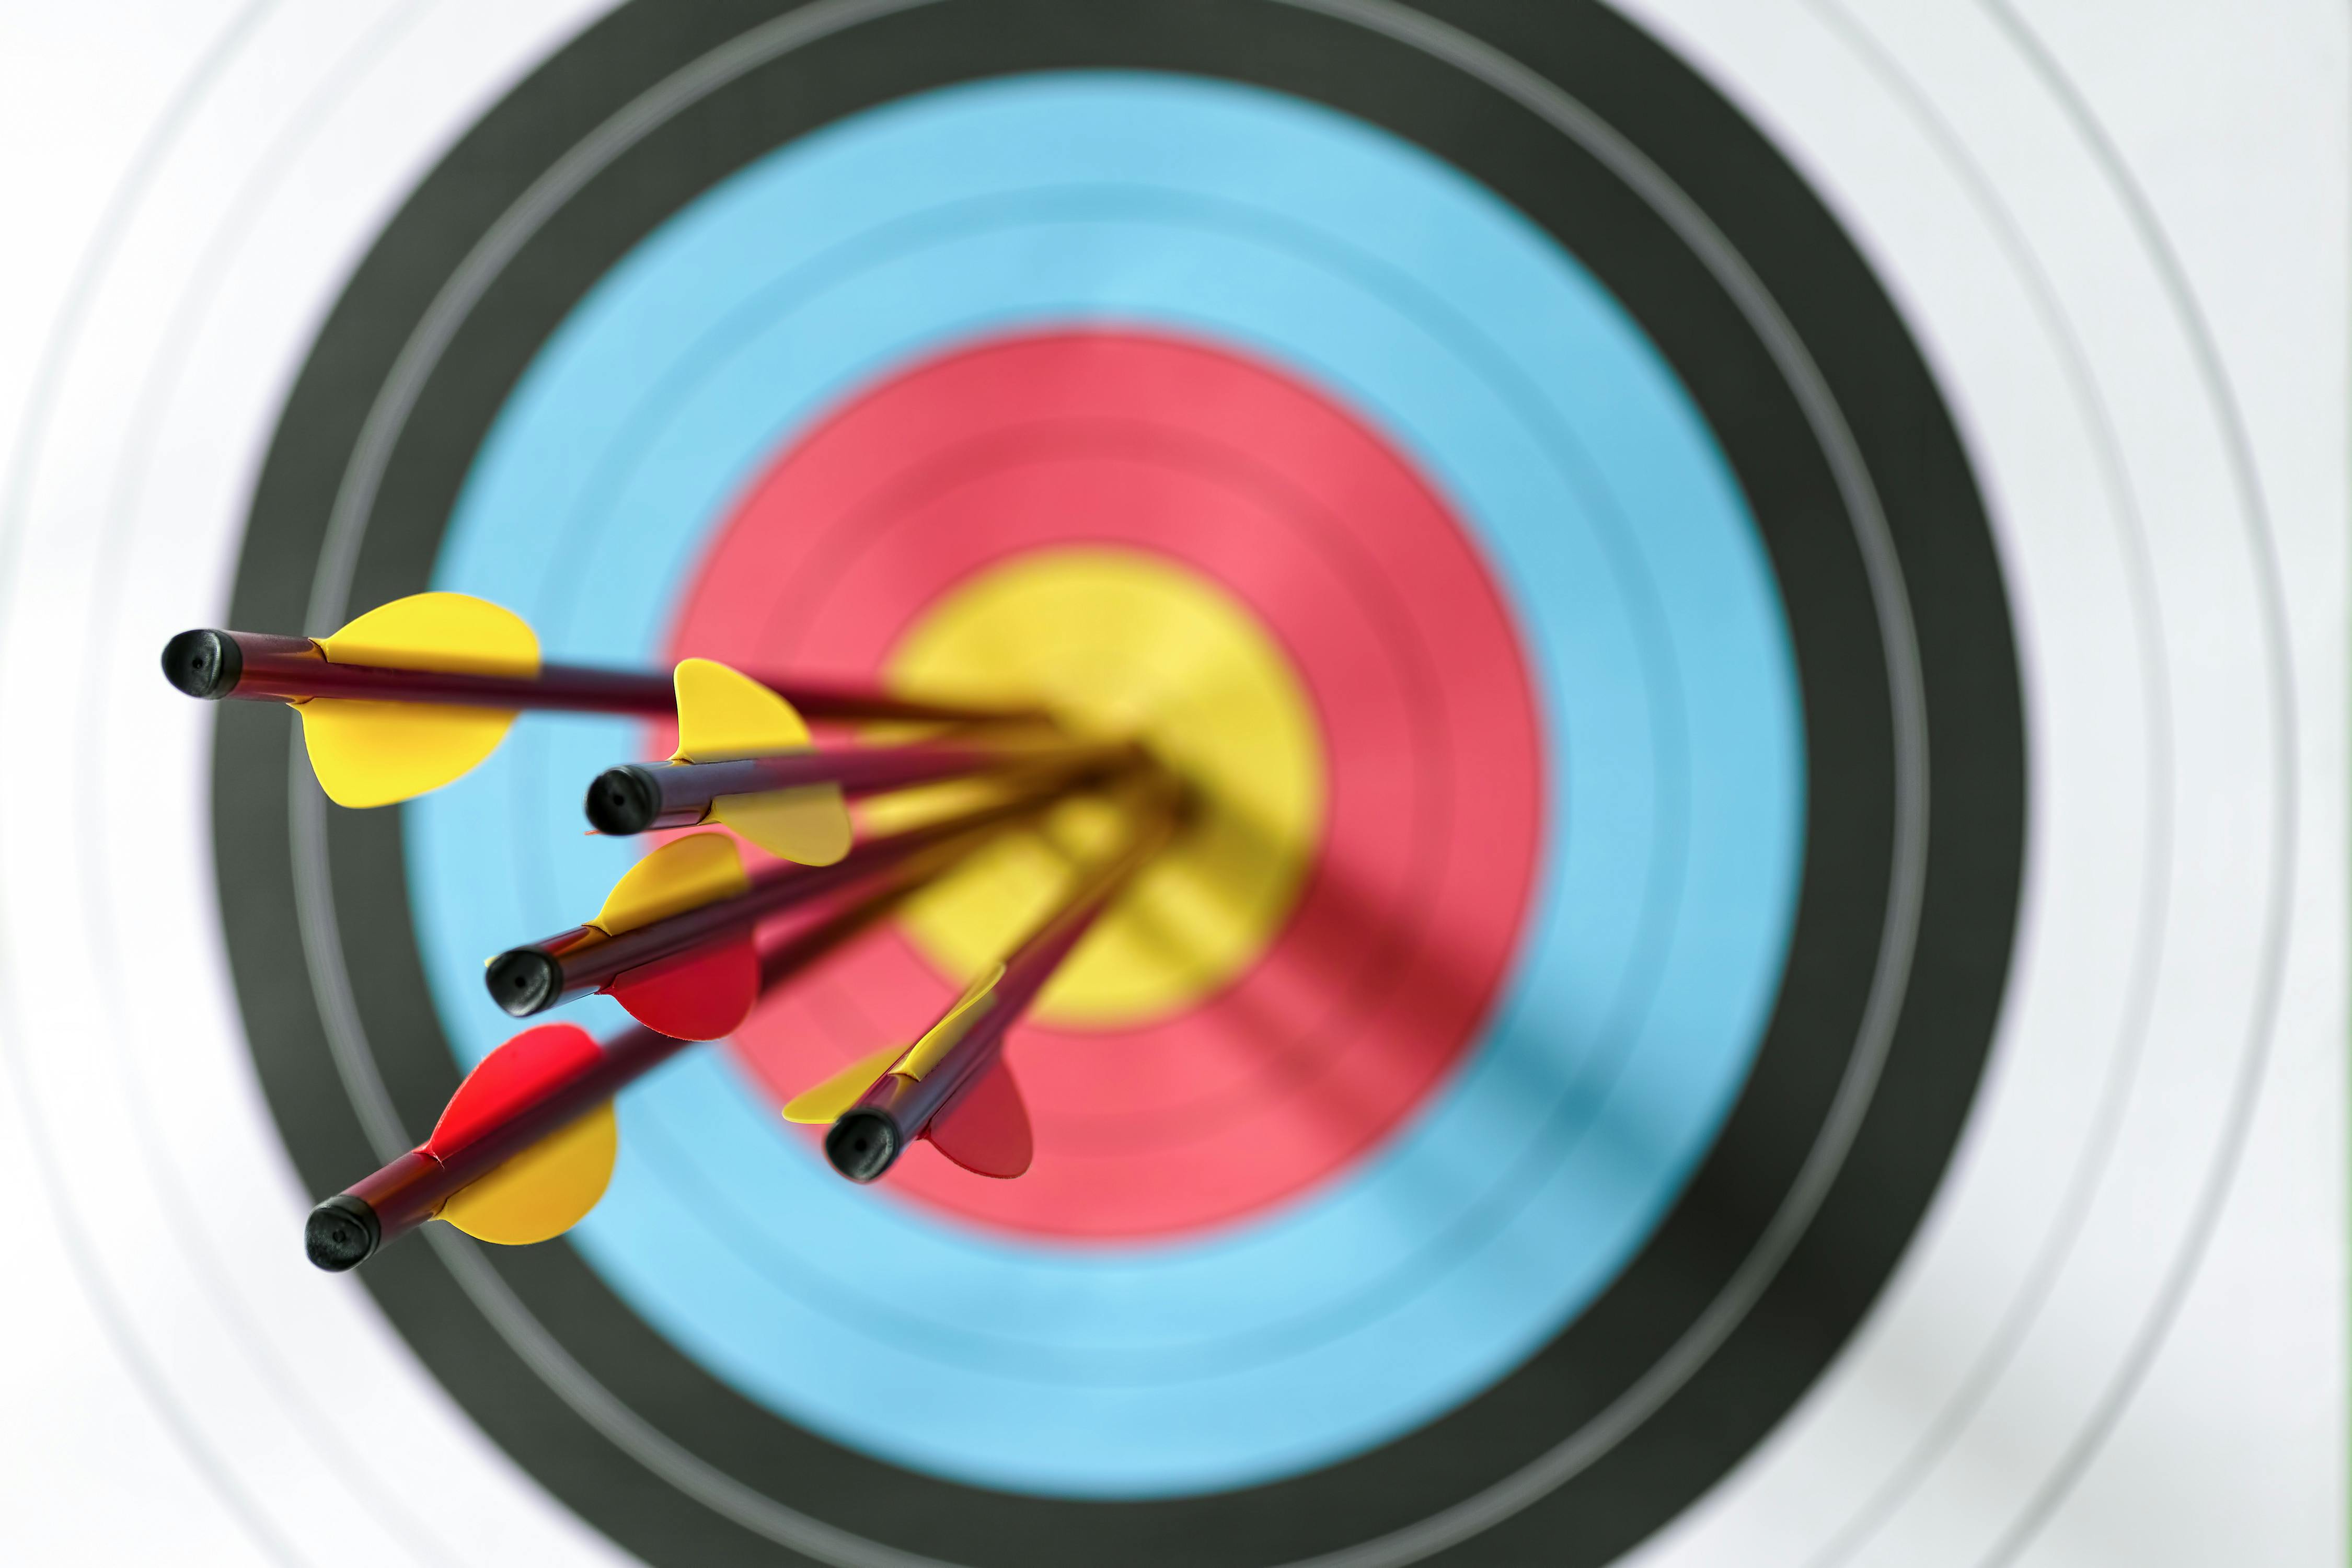 Five arrows in the bull's-eye of an archery target. Selective focus with the focus being on the back end of the arrow, with an out of focus target in the background.